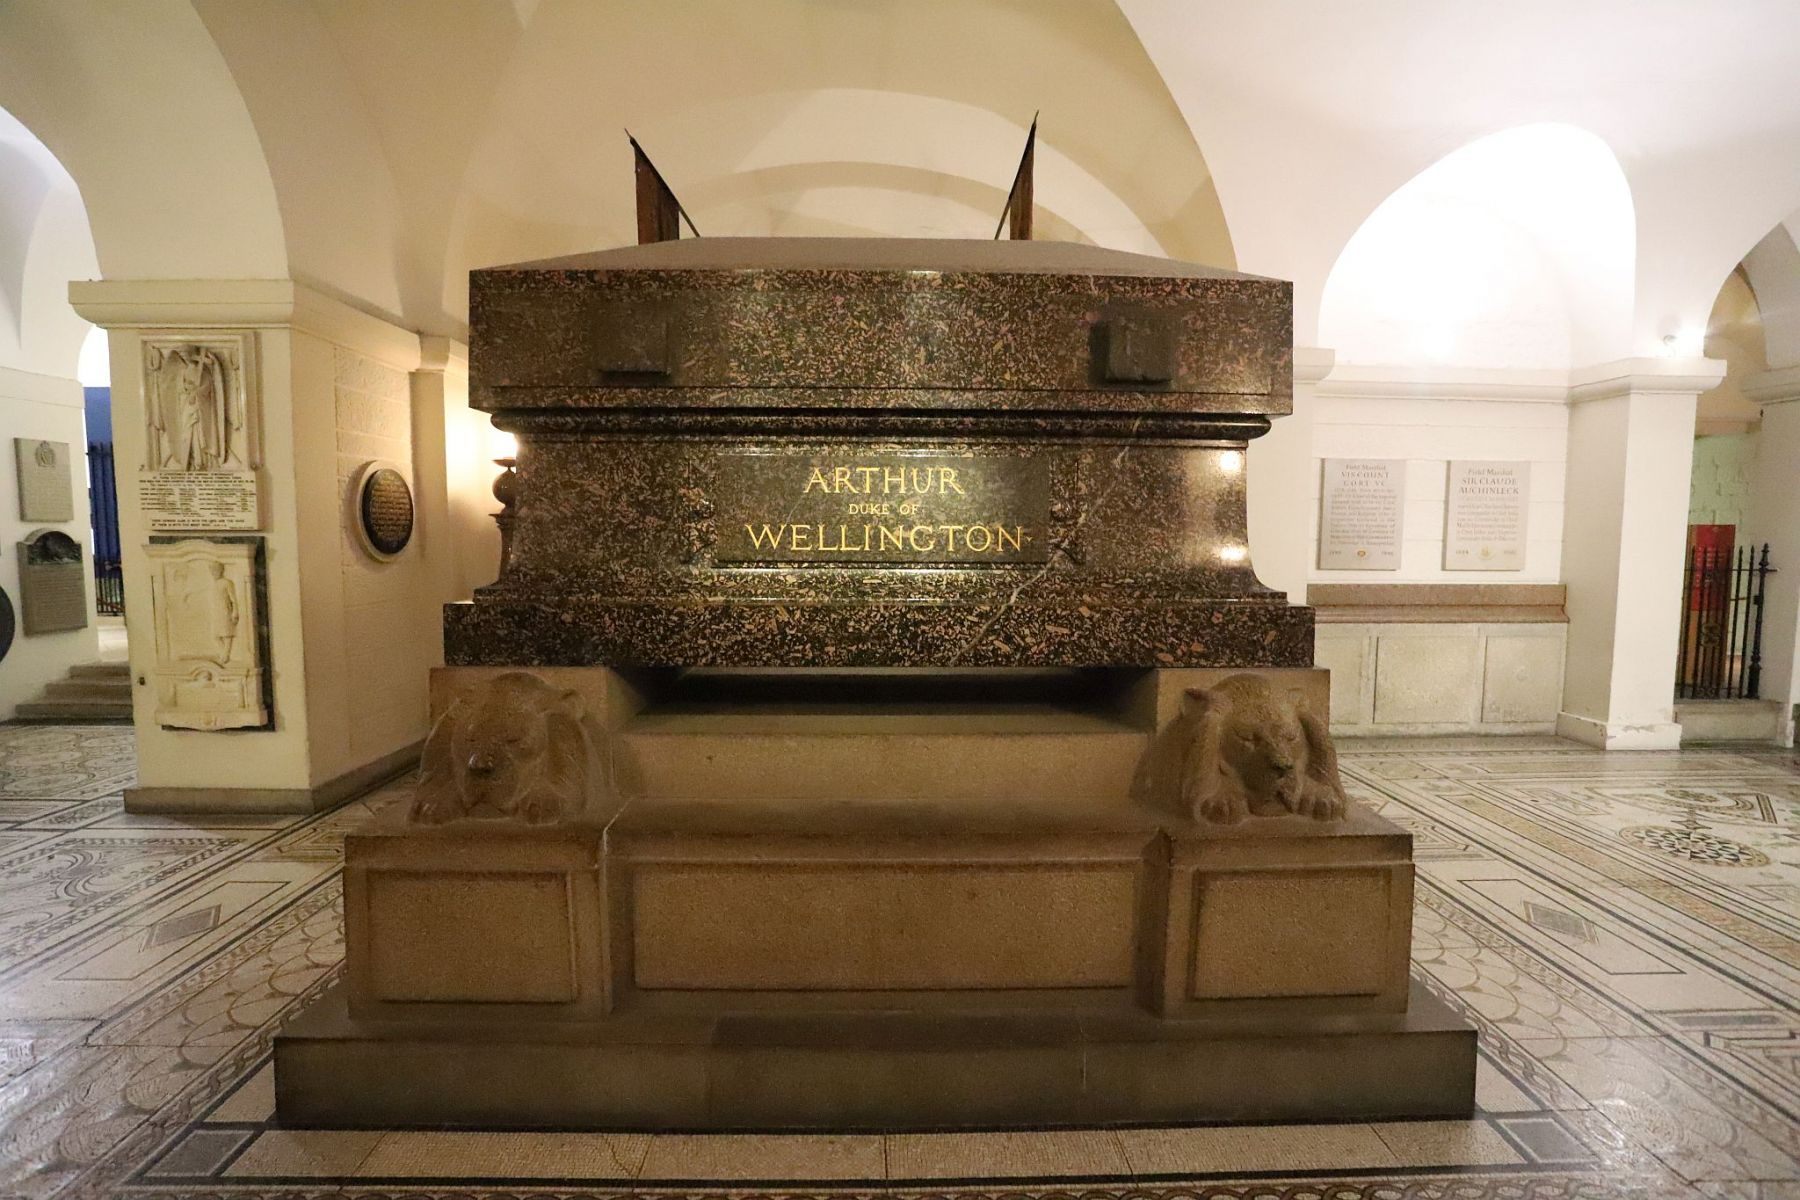 Tomb of Arthur Wellesley, Duke of Wellington, who led the commanded the combined armies which defeated Napoleon at the Battle of Waterloo in 1815.  The crypt of St. Paul's Cathedral, London. 29-Oct-2022.